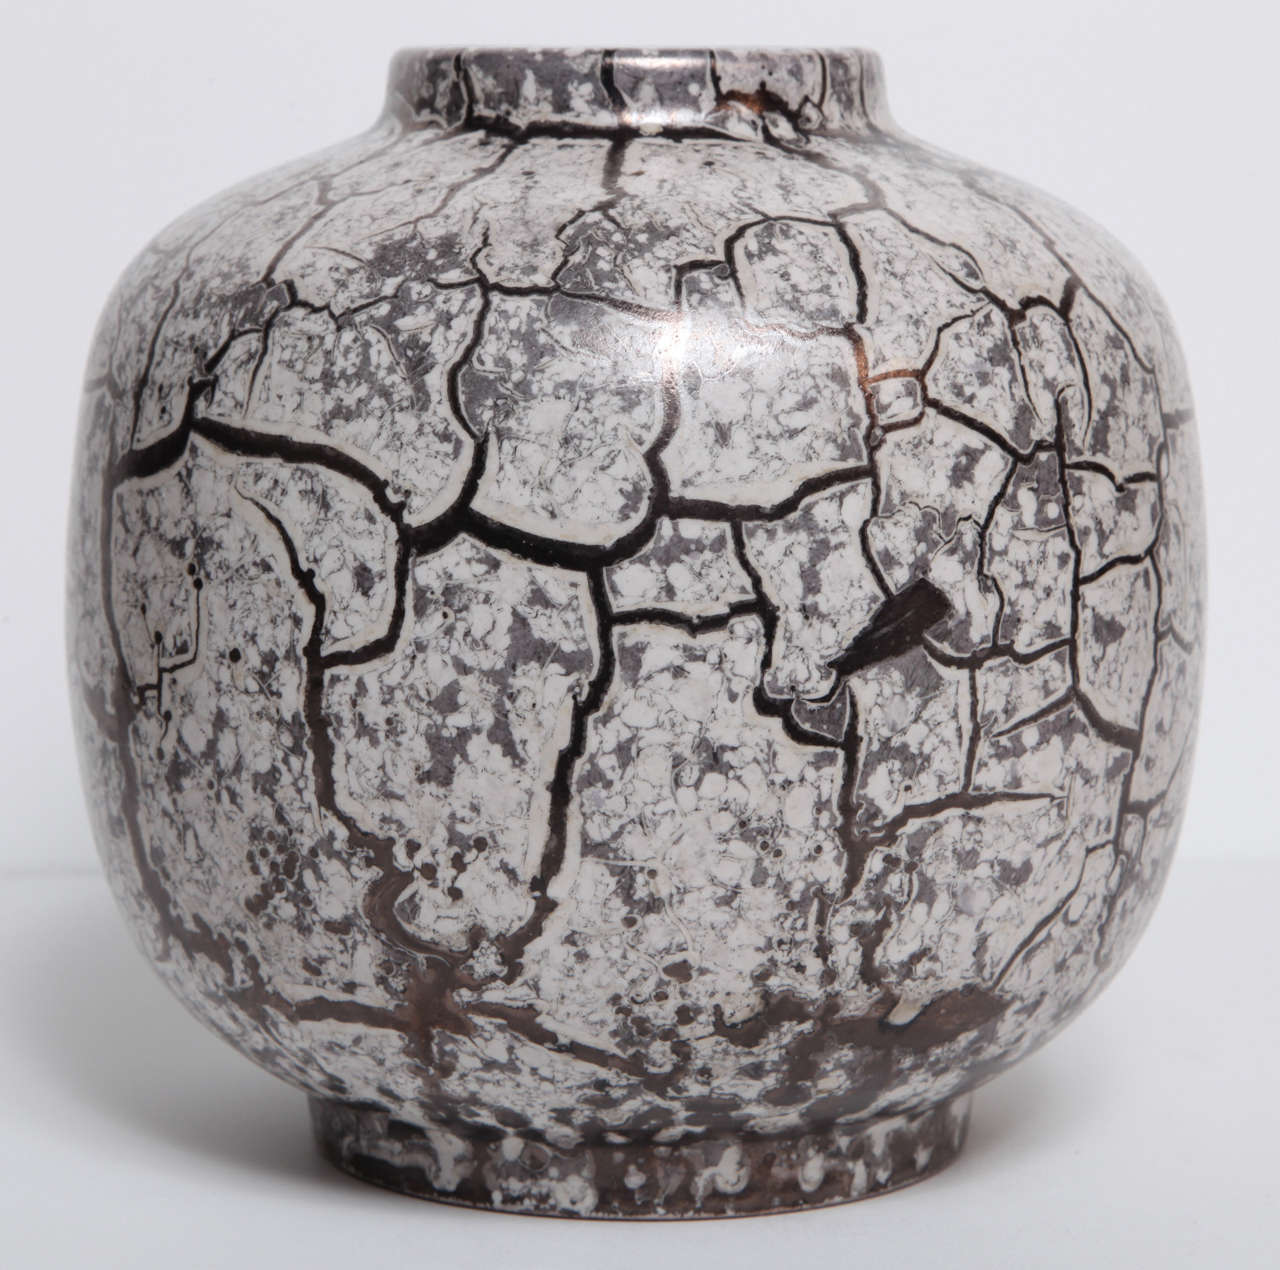 A West German Pottery ceramic vase with a stunning crackle glaze in grey and black. Numbered on bottom.